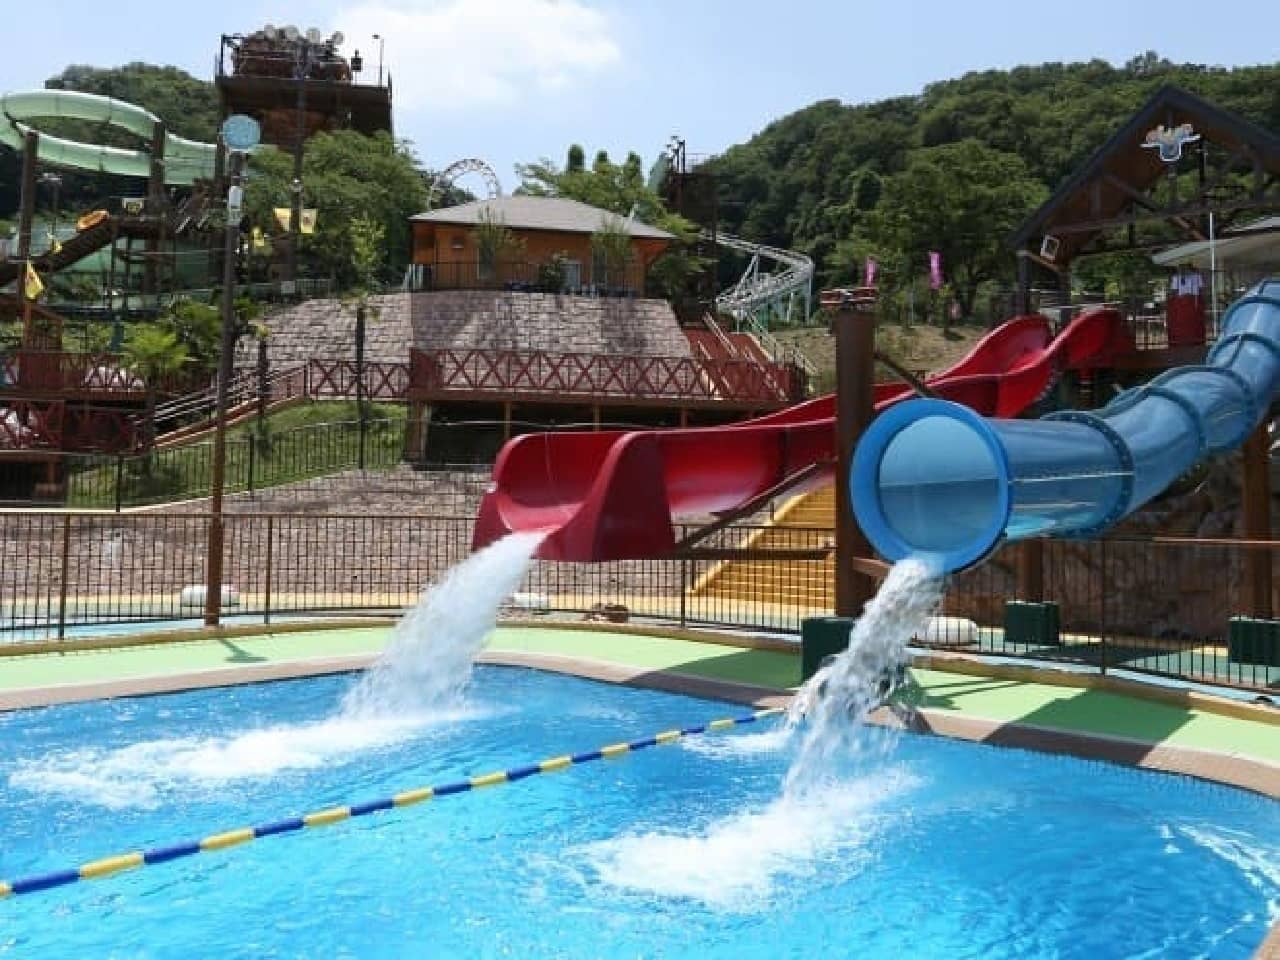 Supervised by the technical staff in charge of waterslides at "Tokyo Summerland"